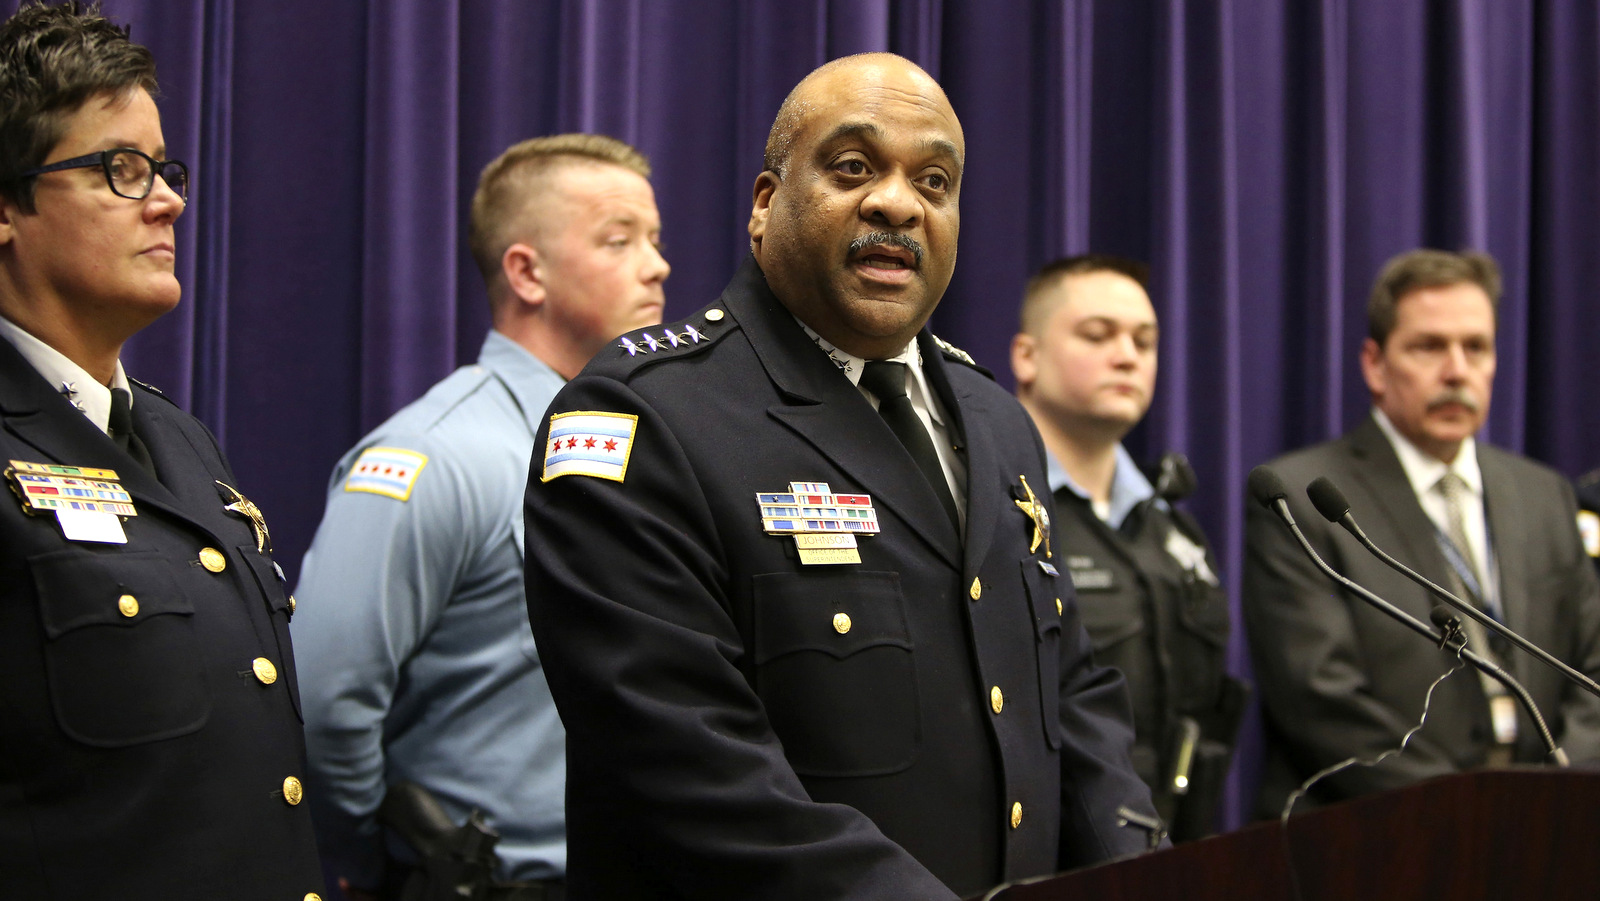 Chicago Police Superintendent Eddie Johnson speaks during a news conference Thursday, Jan. 5, 2017, on the hate crime and other charges filed against four individuals for an attack on a man that was captured on a Facebook video. (Antonio Perez/Chicago Tribune via AP)